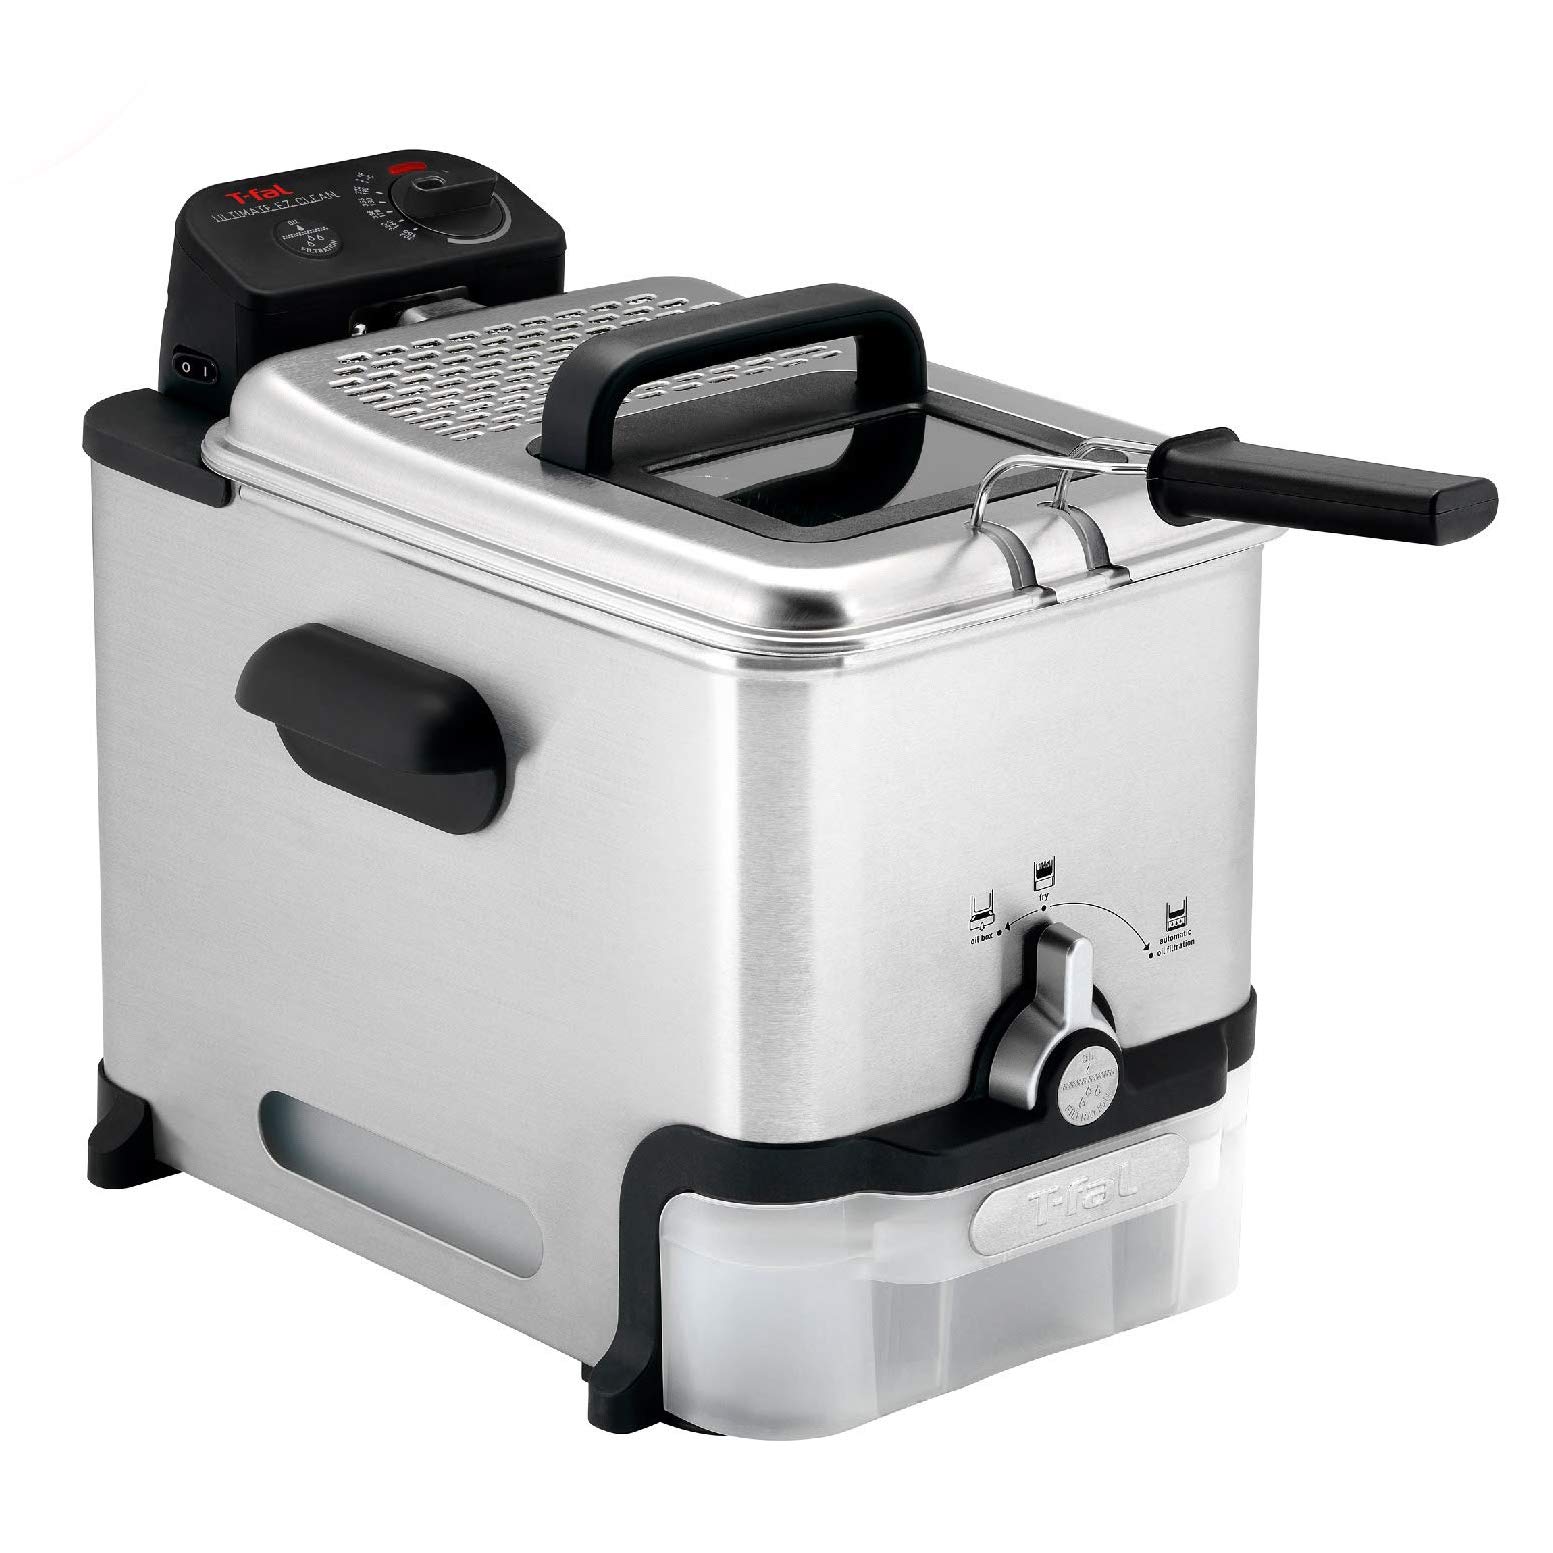 T-fal Deep Fryer with Basket, Stainless Steel, Easy to ...